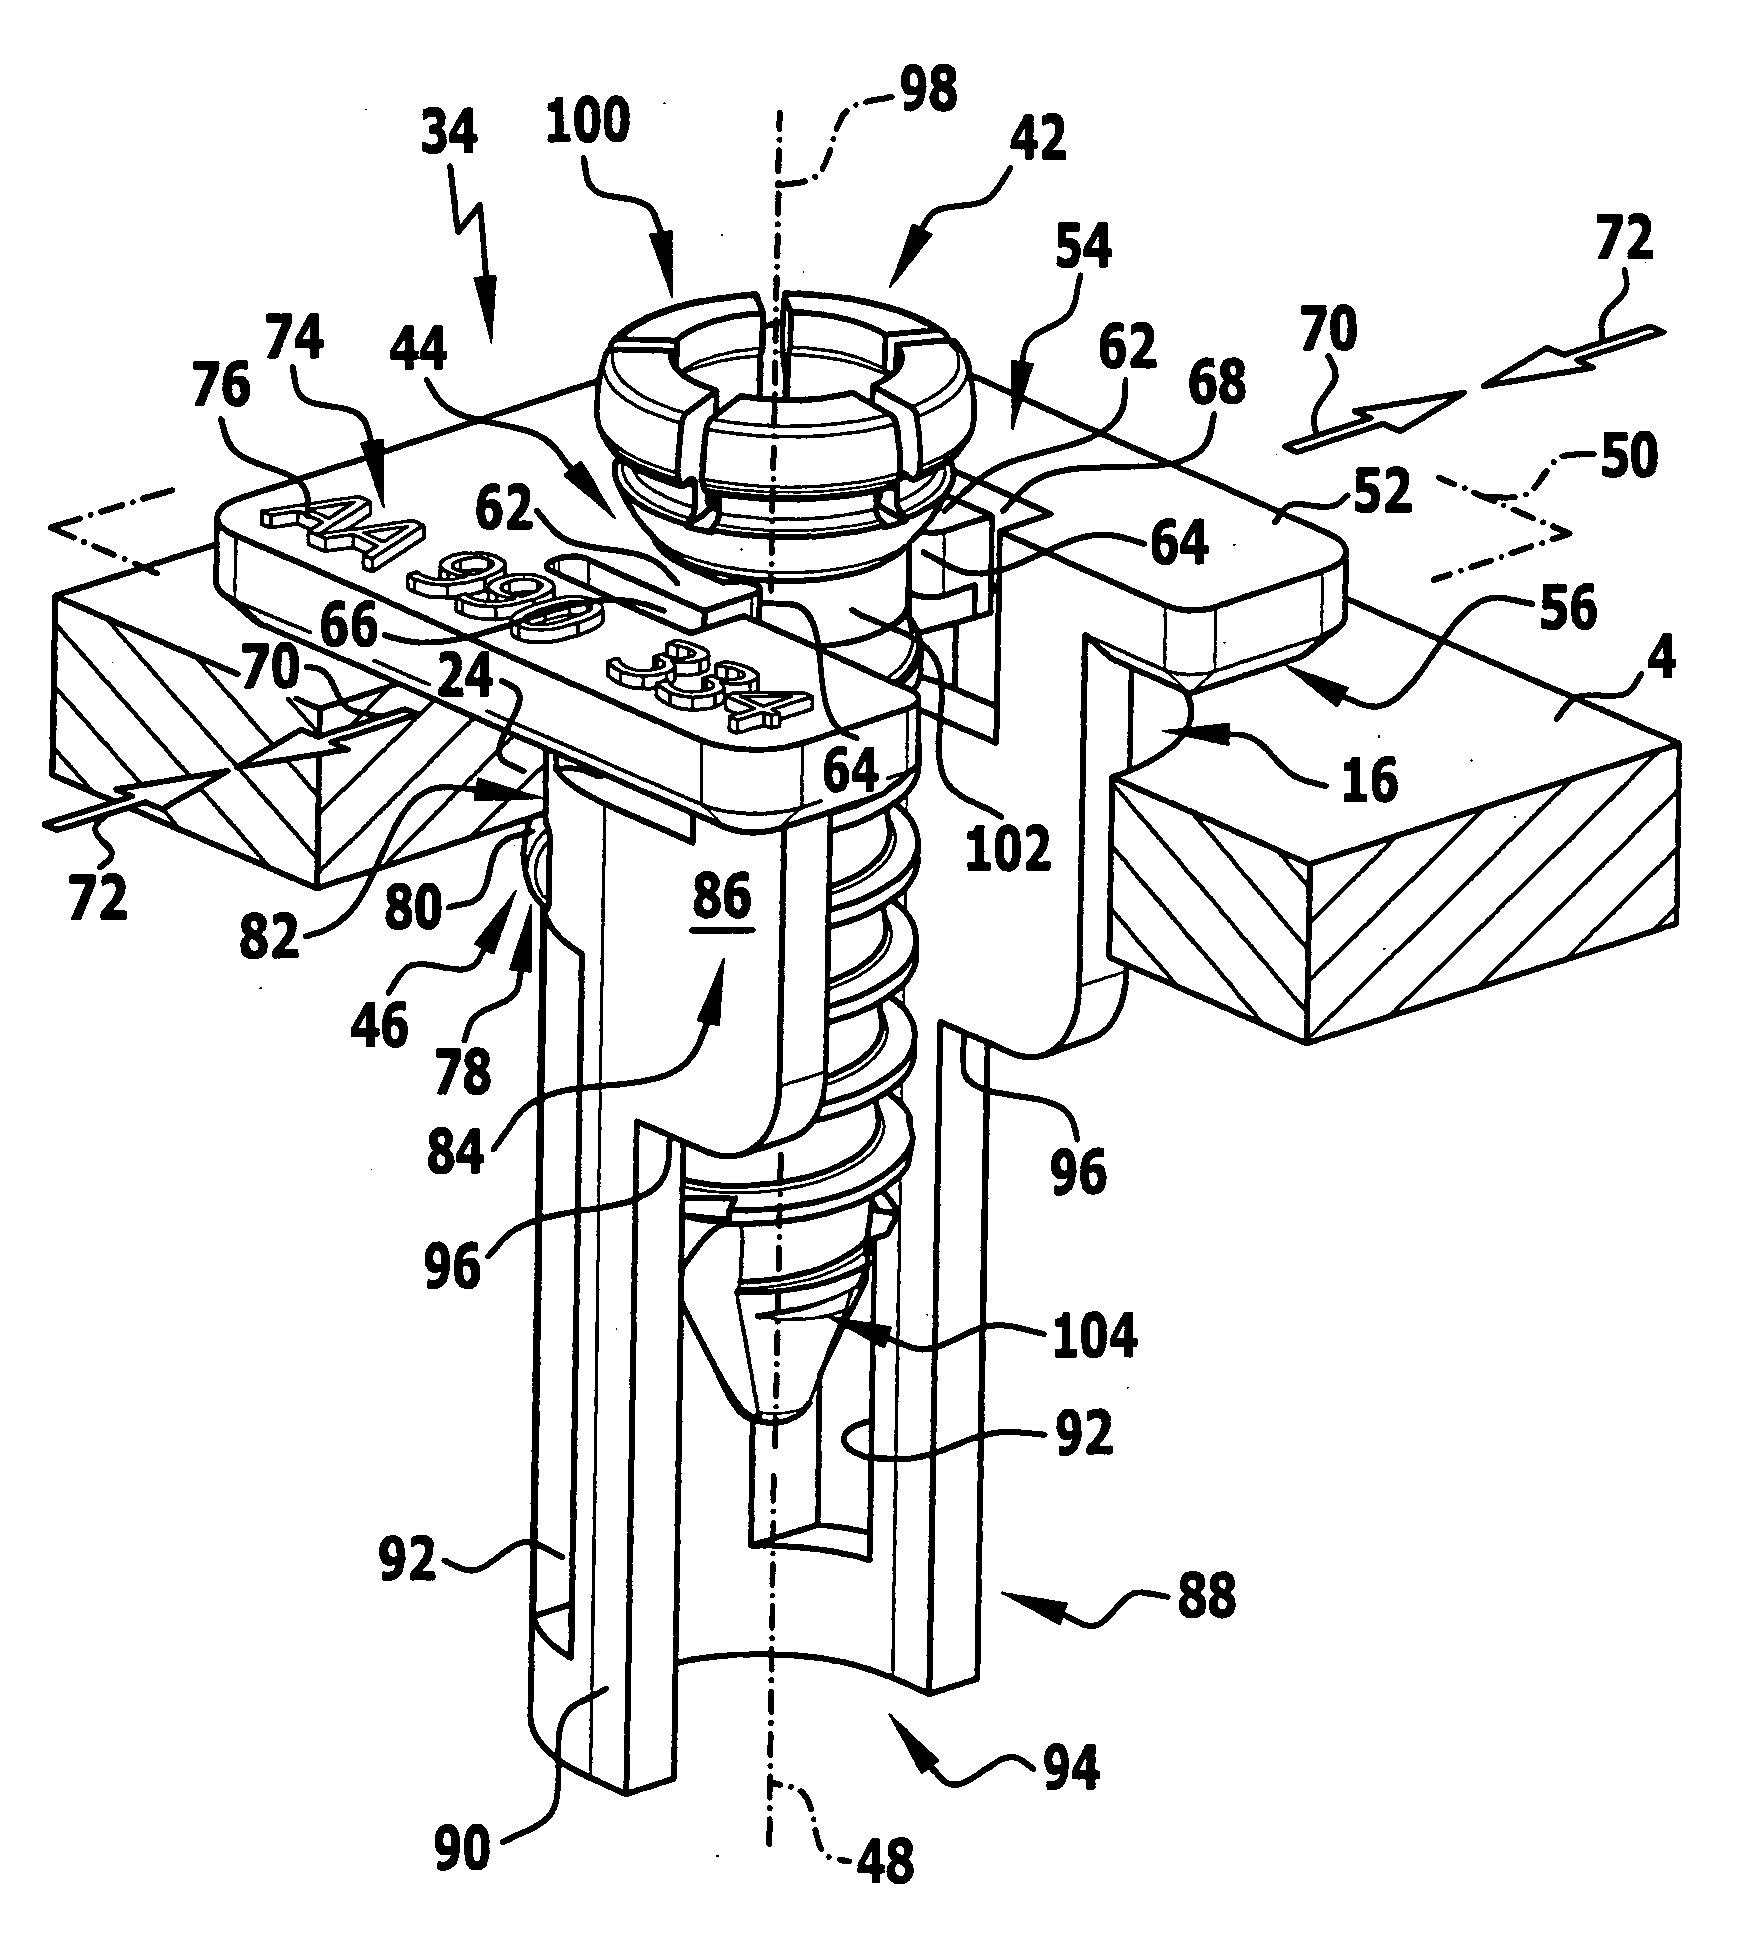 Holding device for an implant